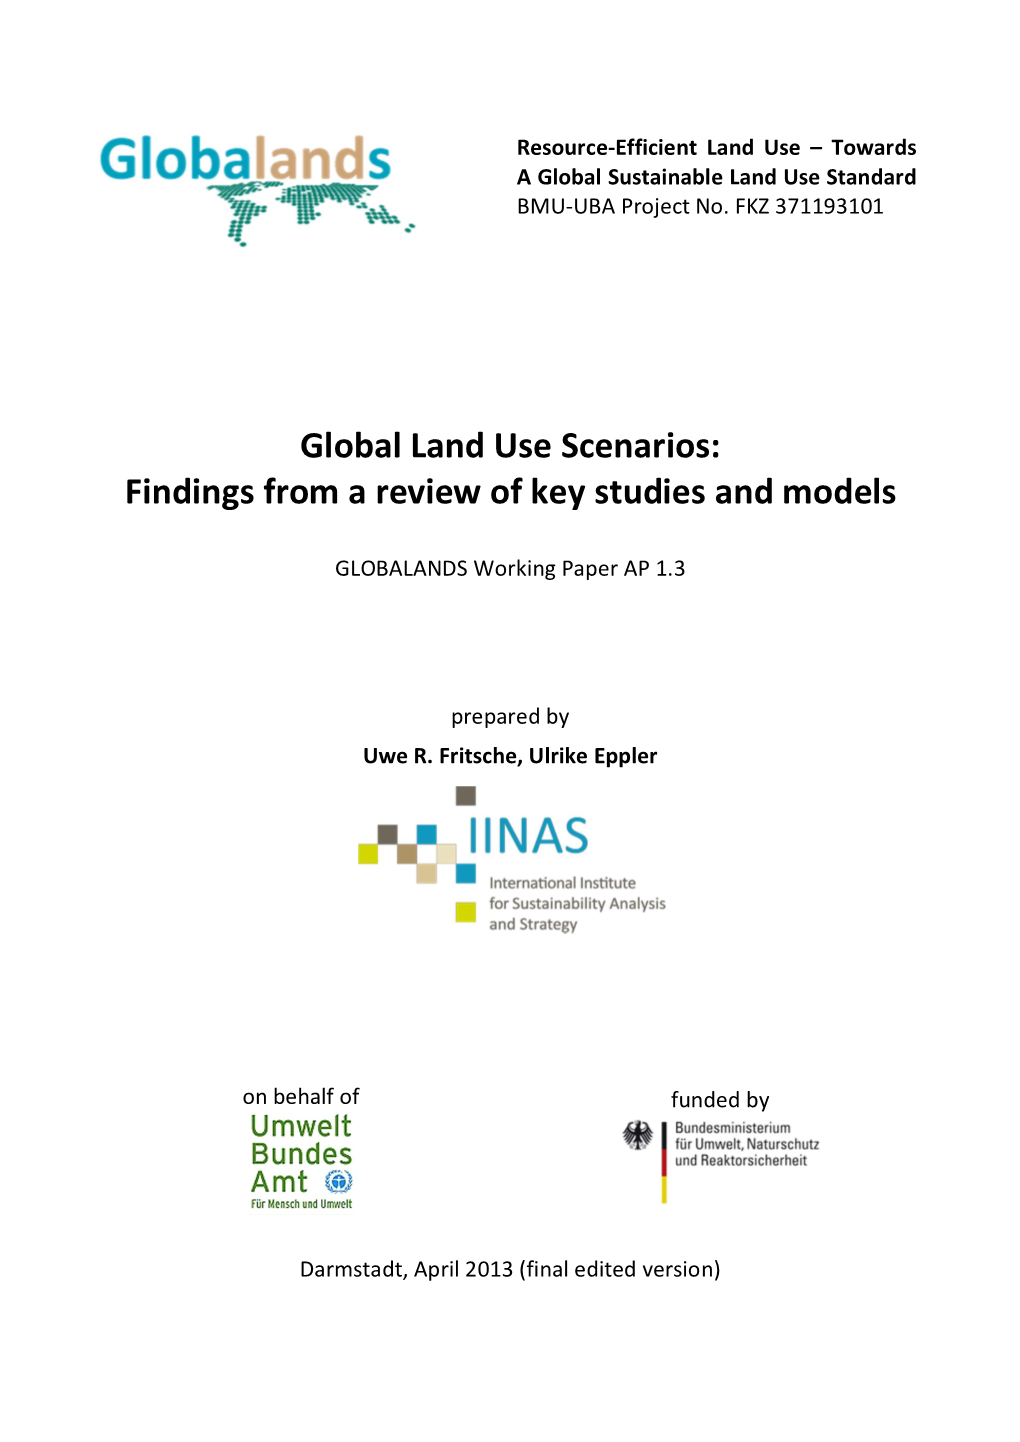 Global Land Use Scenarios: Findings from a Review of Key Studies and Models